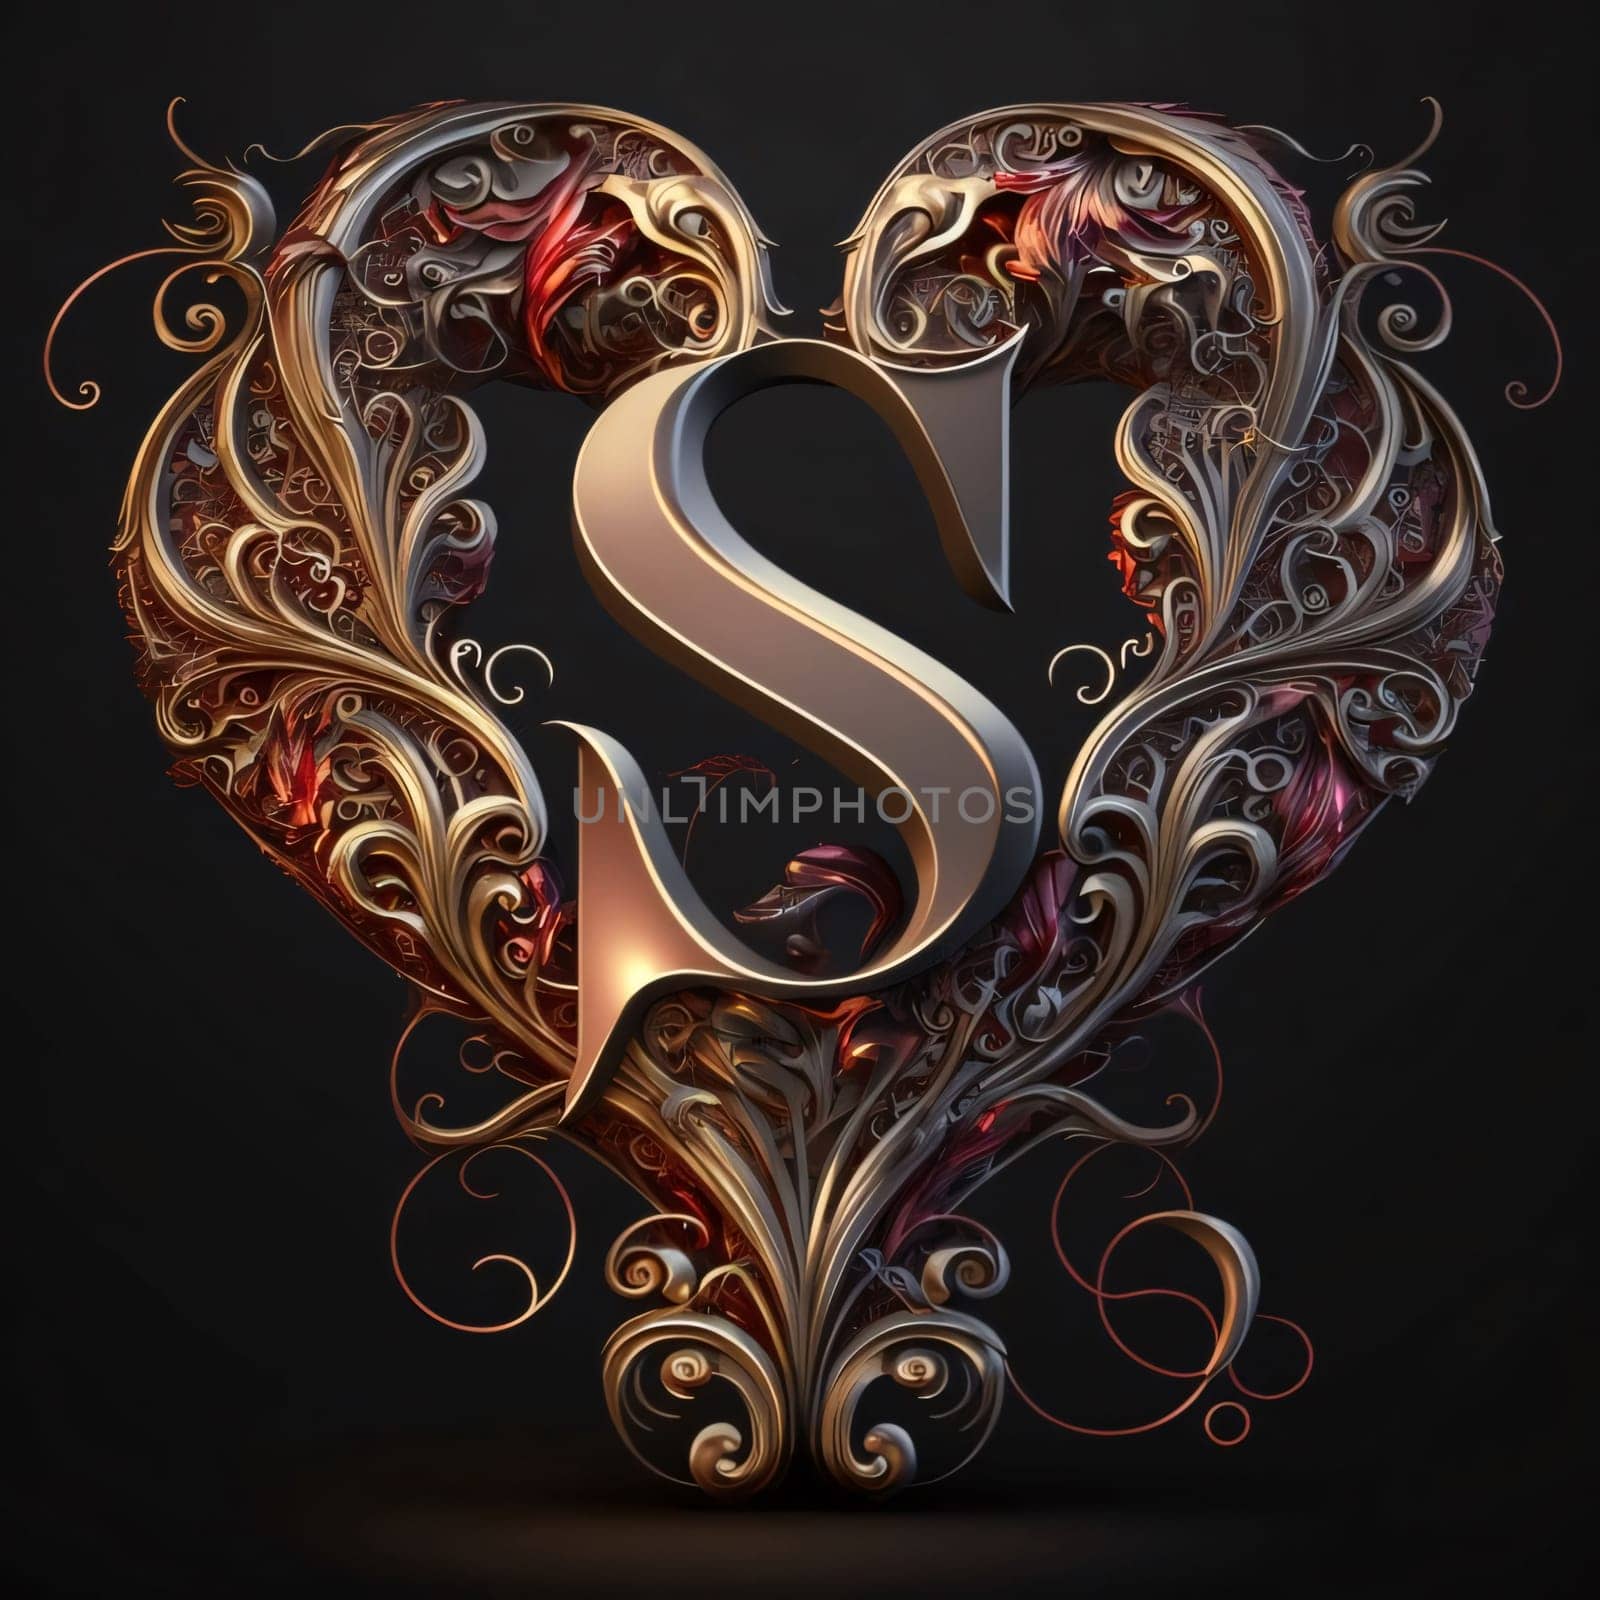 Graphic alphabet letters: 3D illustration, 3D rendering, letter S in the form of a heart with ornament